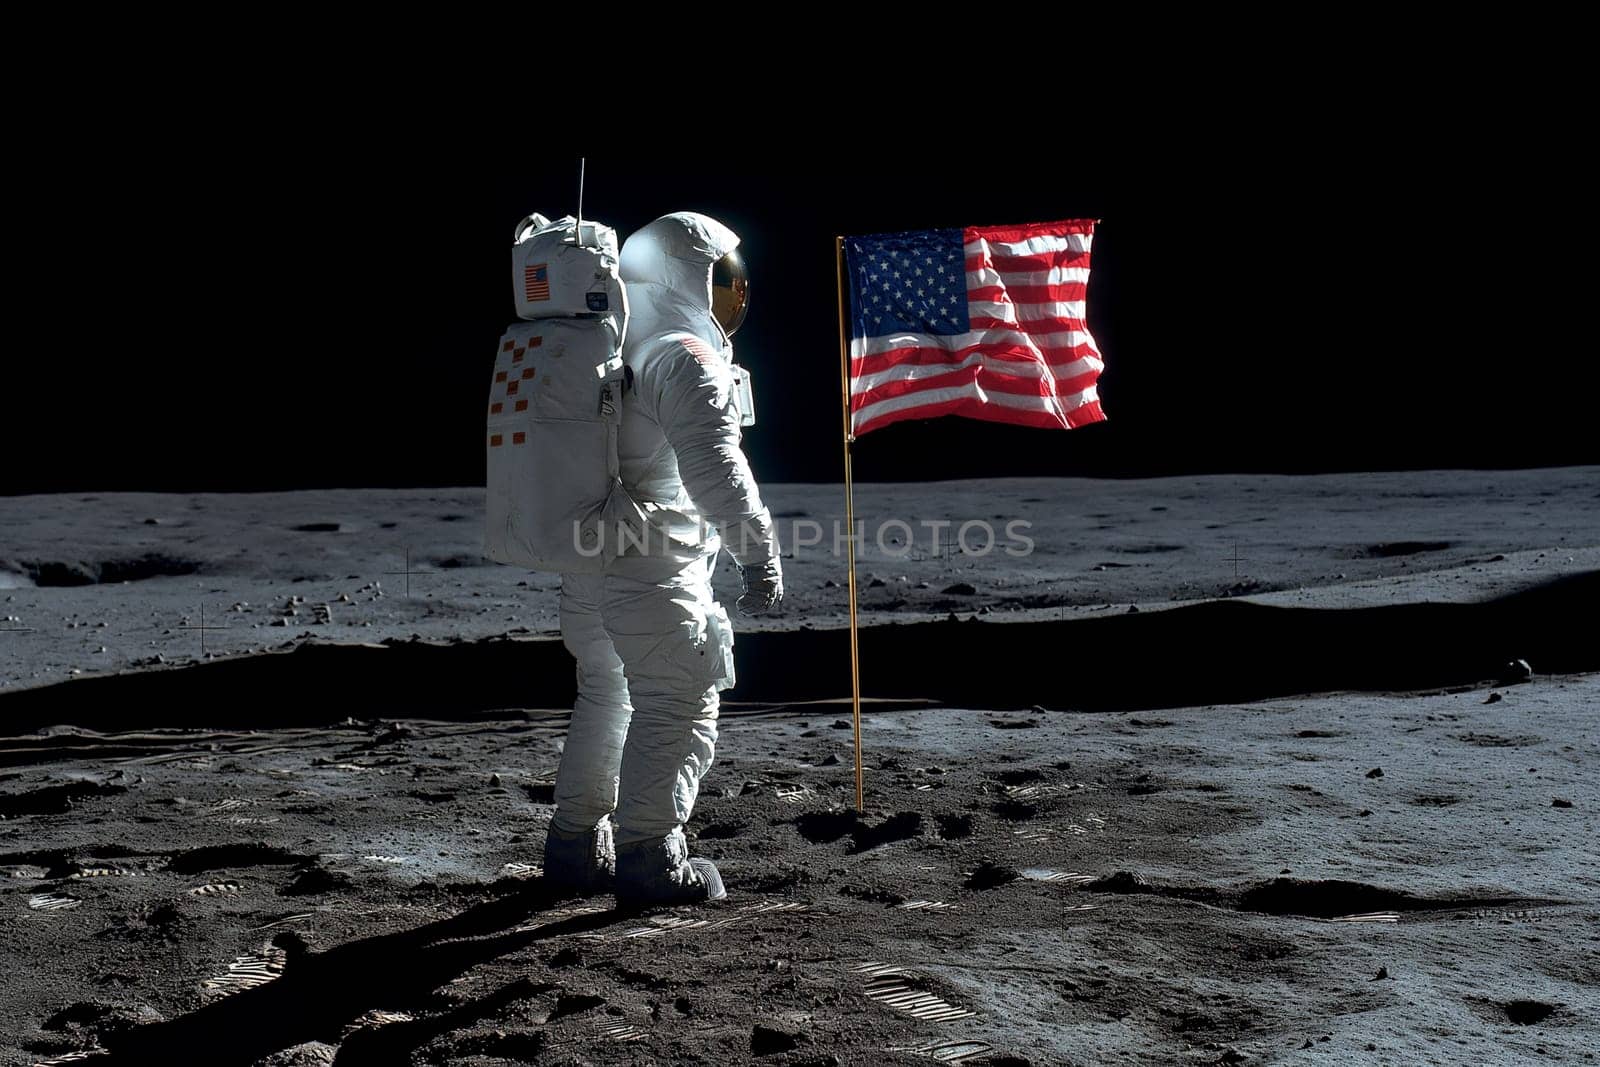 An astronaut in a space suit explores the lunar terrain as the US flag stands out against the dark lunar landscape.